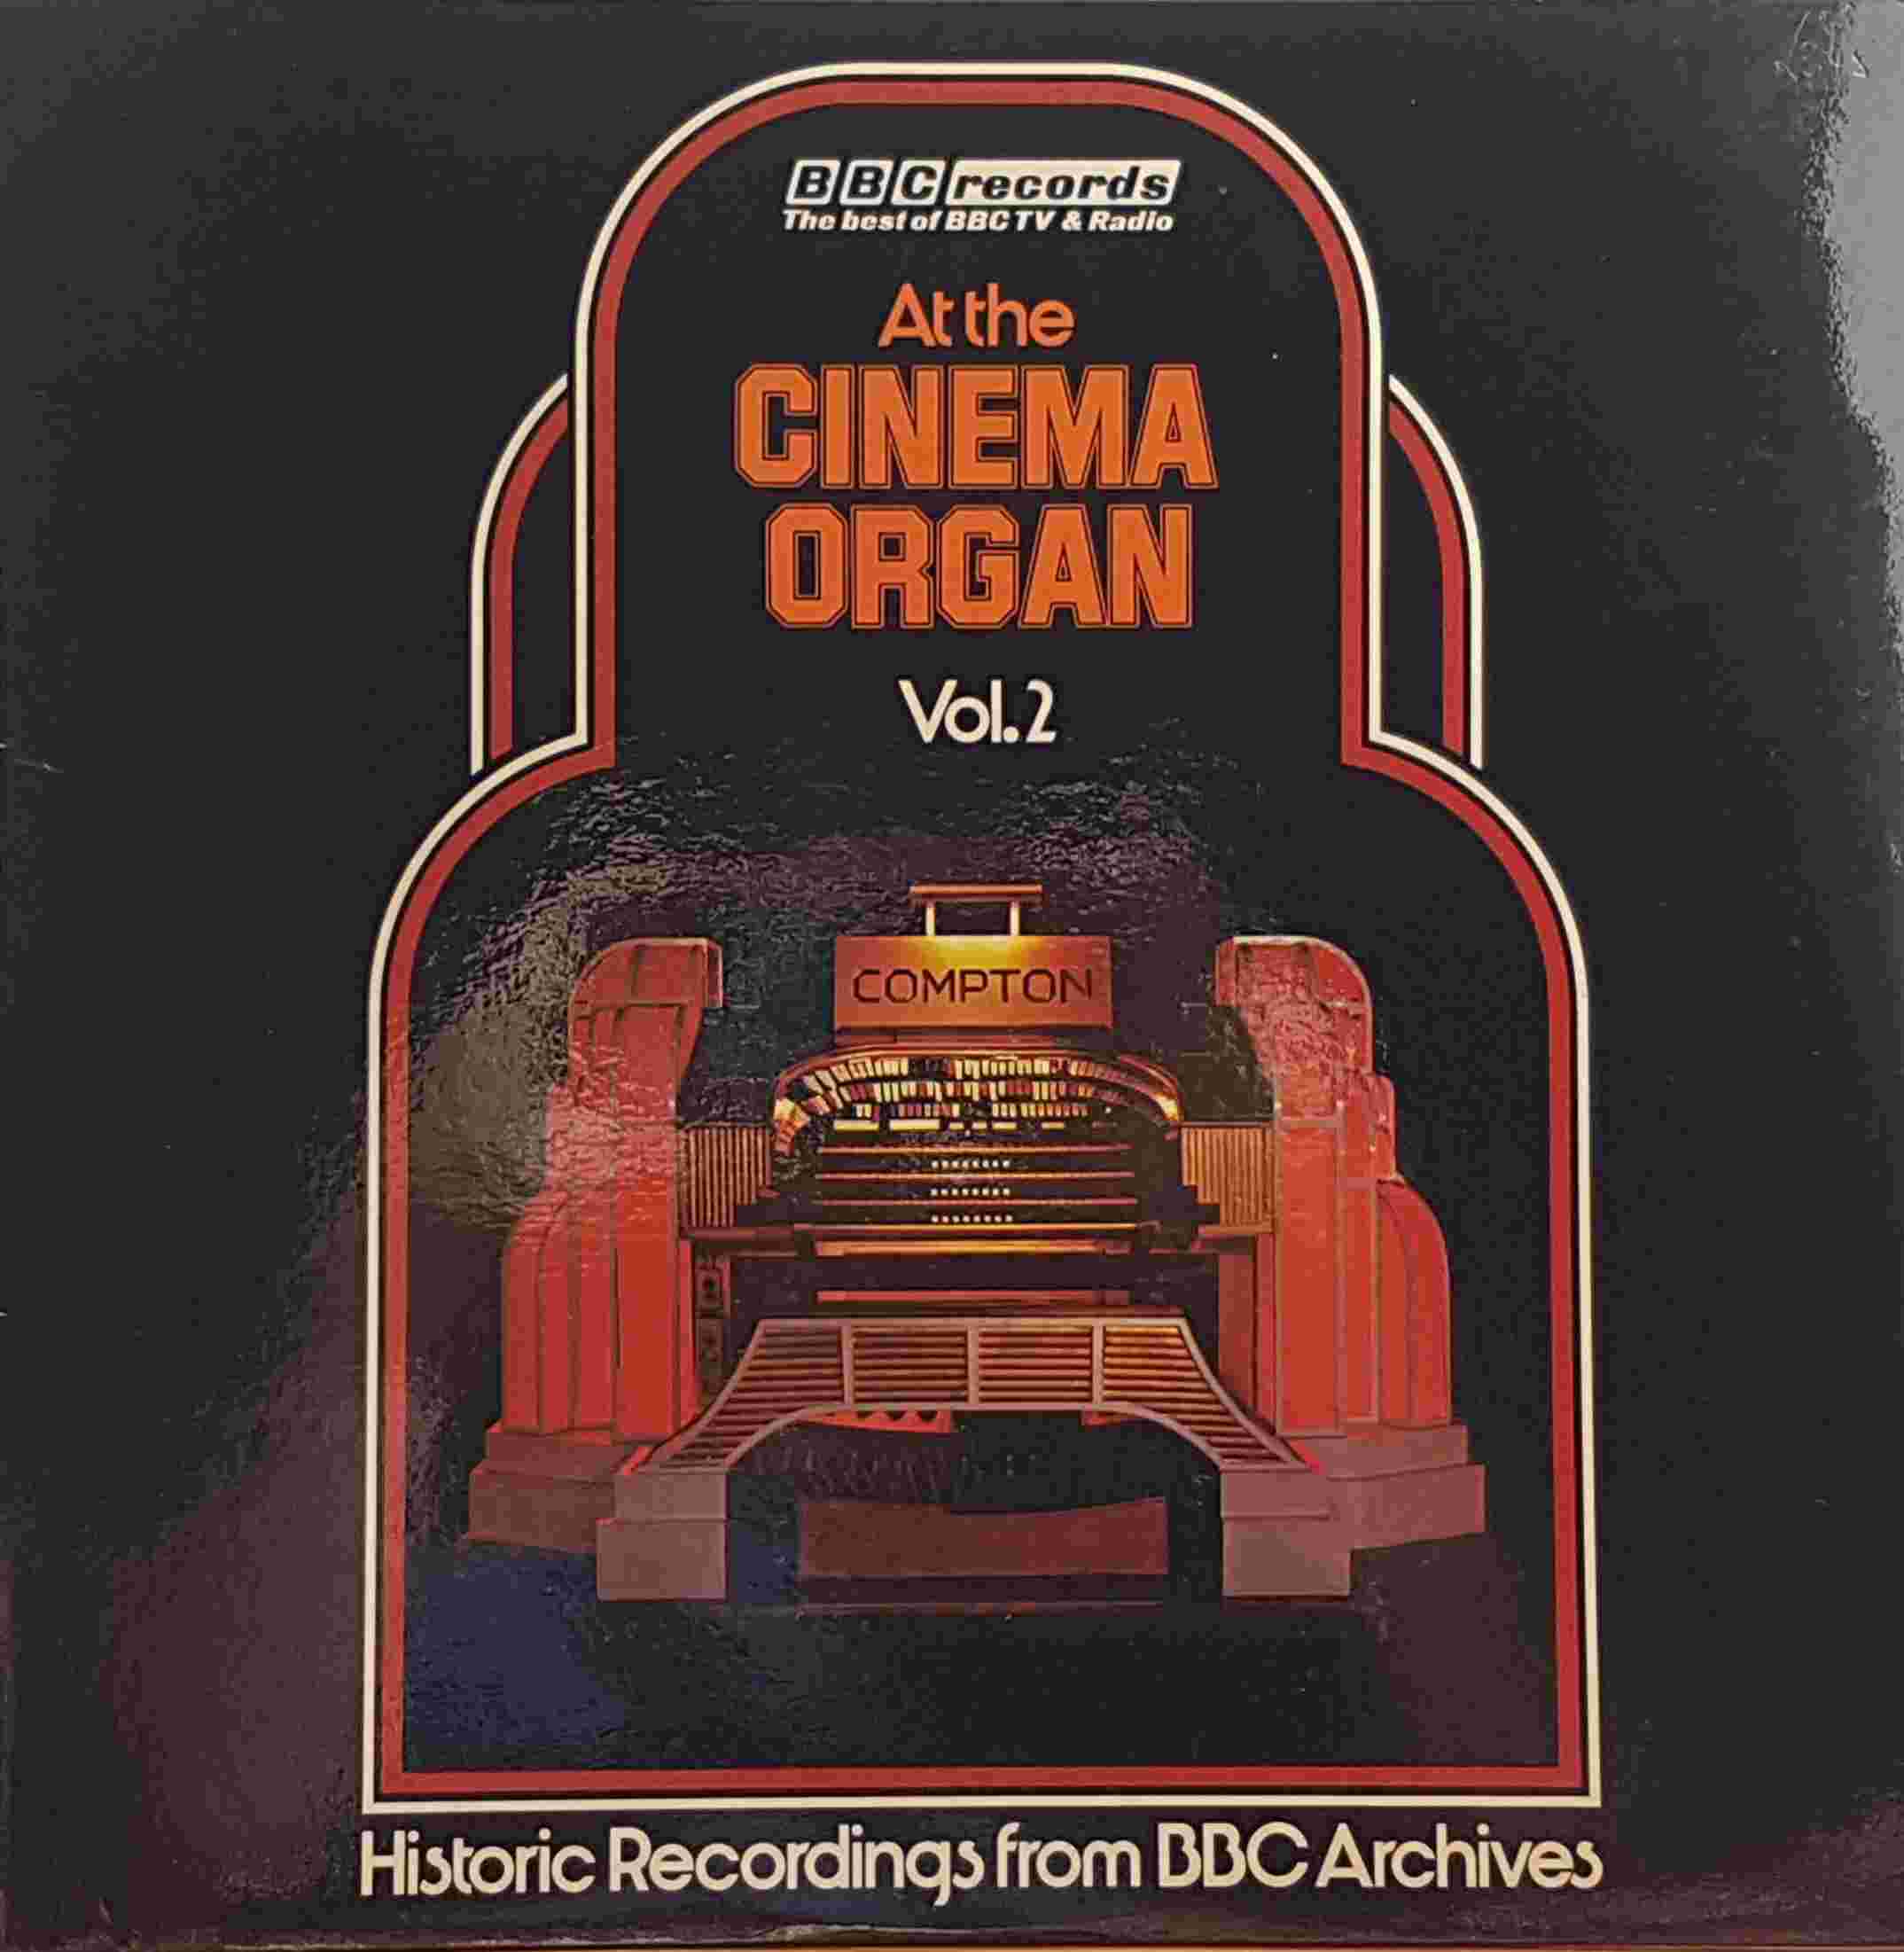 Picture of REC 162 At the cinema organ - Volume 2 by artist Various from the BBC albums - Records and Tapes library